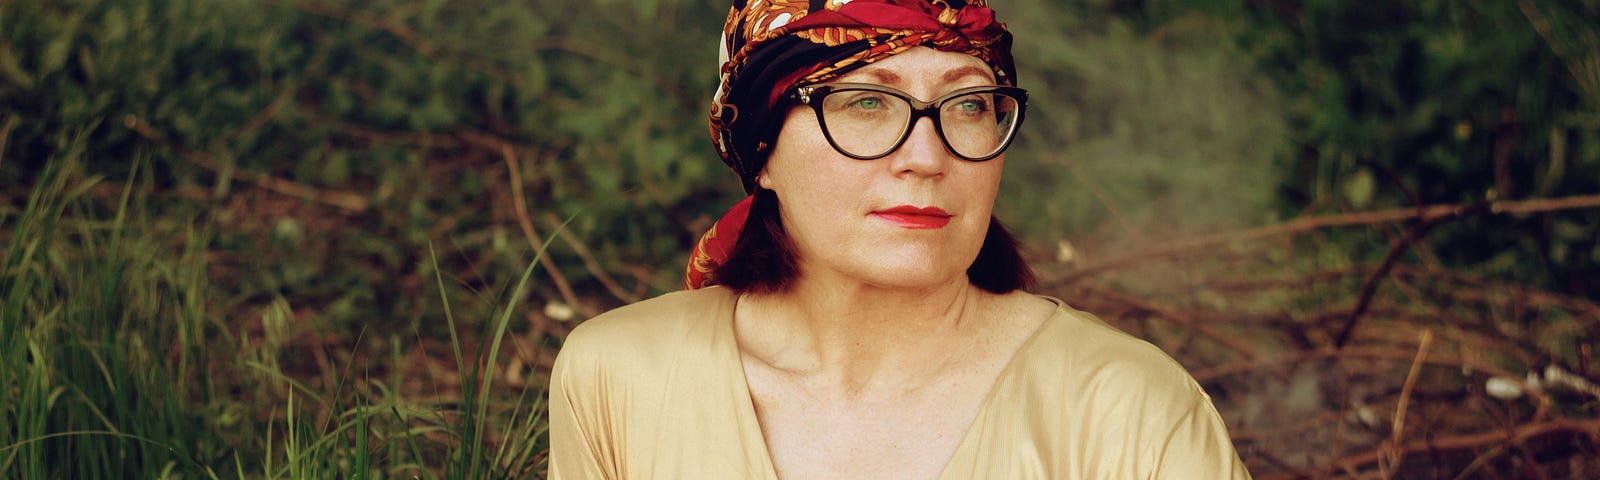 A woman in a bright yellow shirt, glasses and a red head scarf looks off to the side